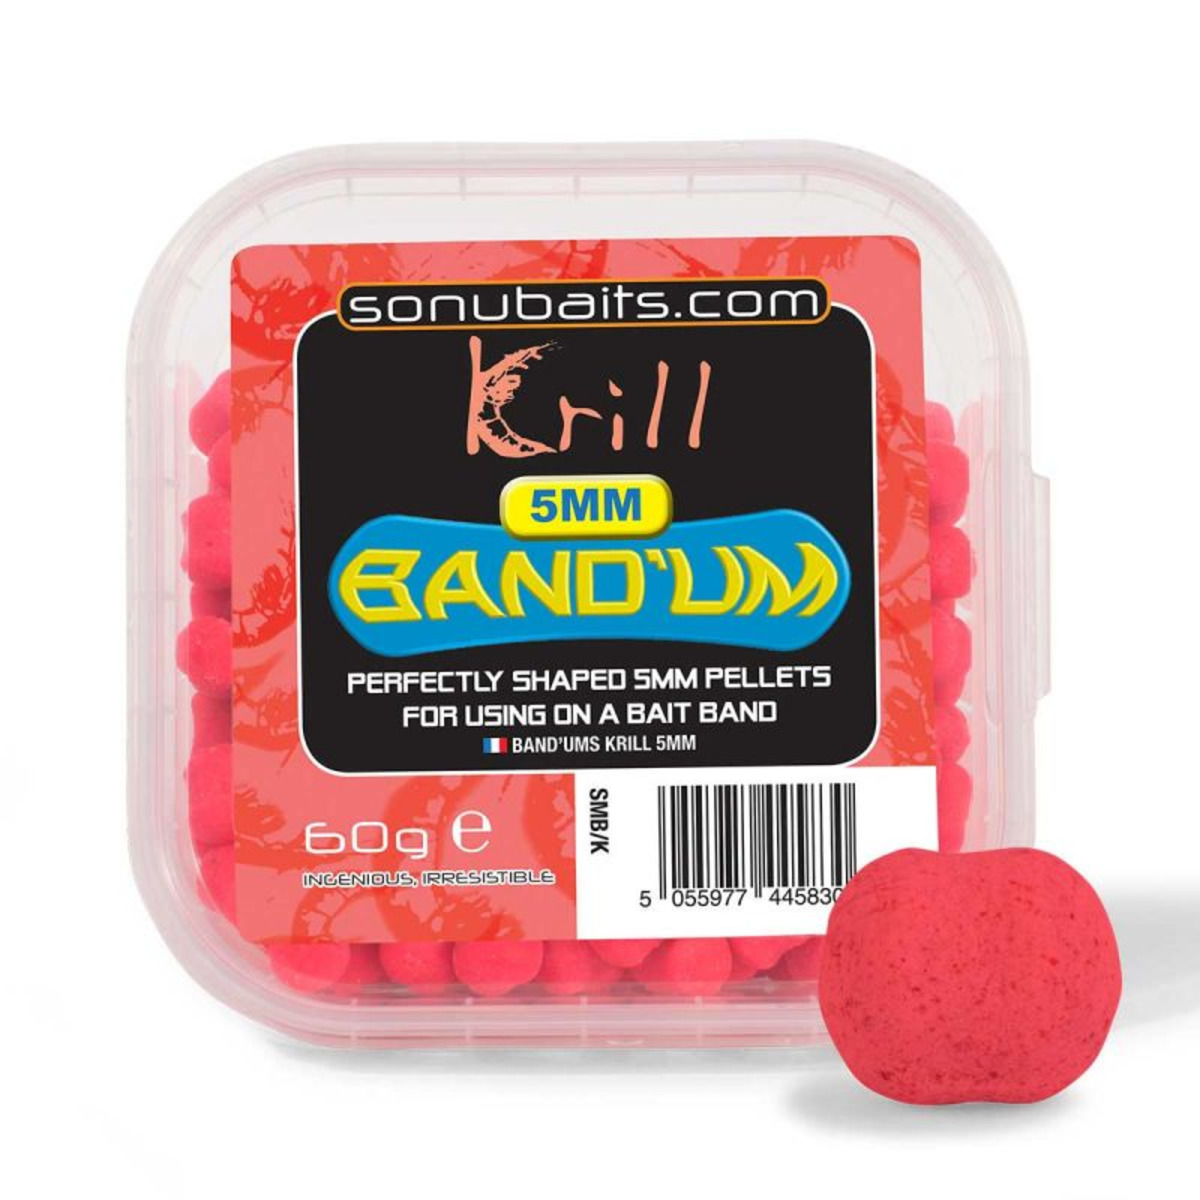 Sonubaits 5 mm Band´ums - 5 mm - 60 g - Krill